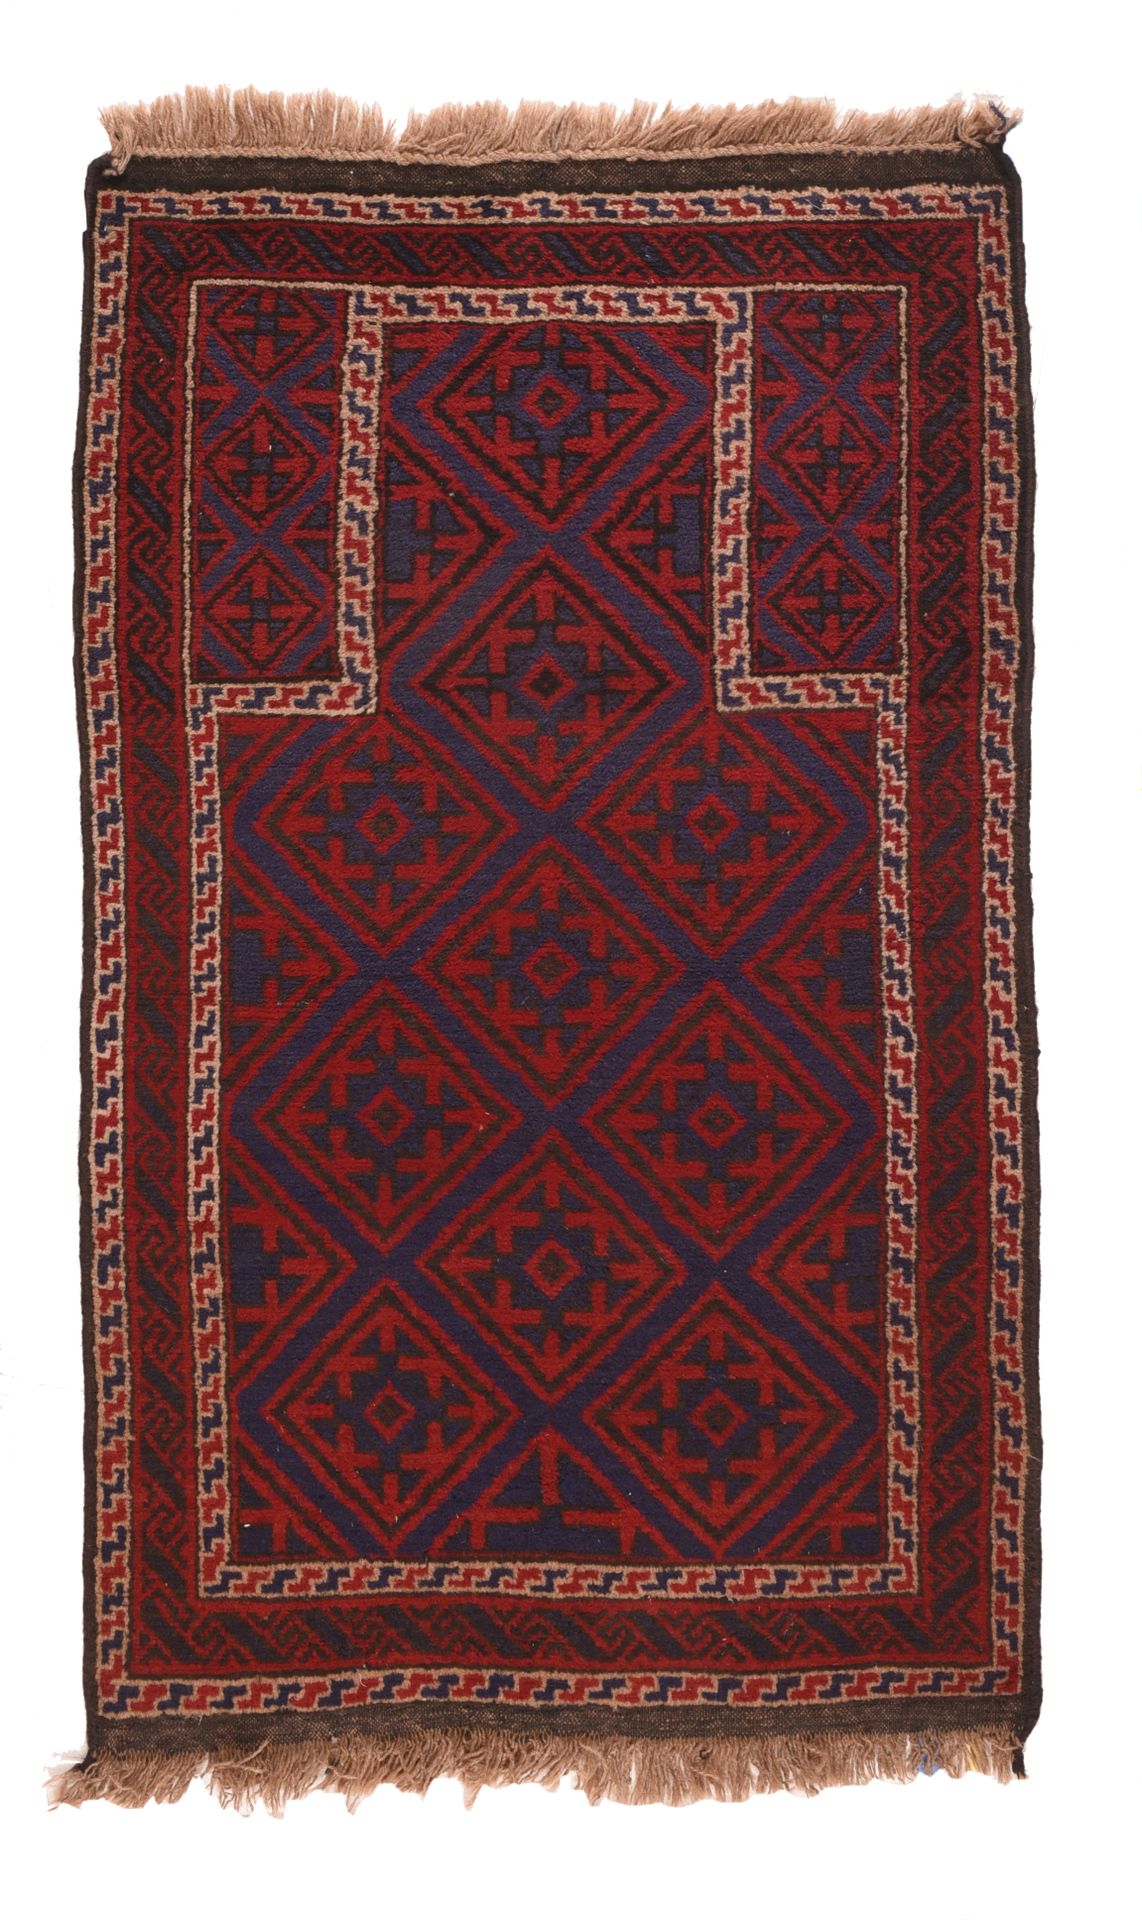 Null Tapis afghan vintage Balouch, 2'8'' x 4'7'' ( 0.81 x 1.40 M )